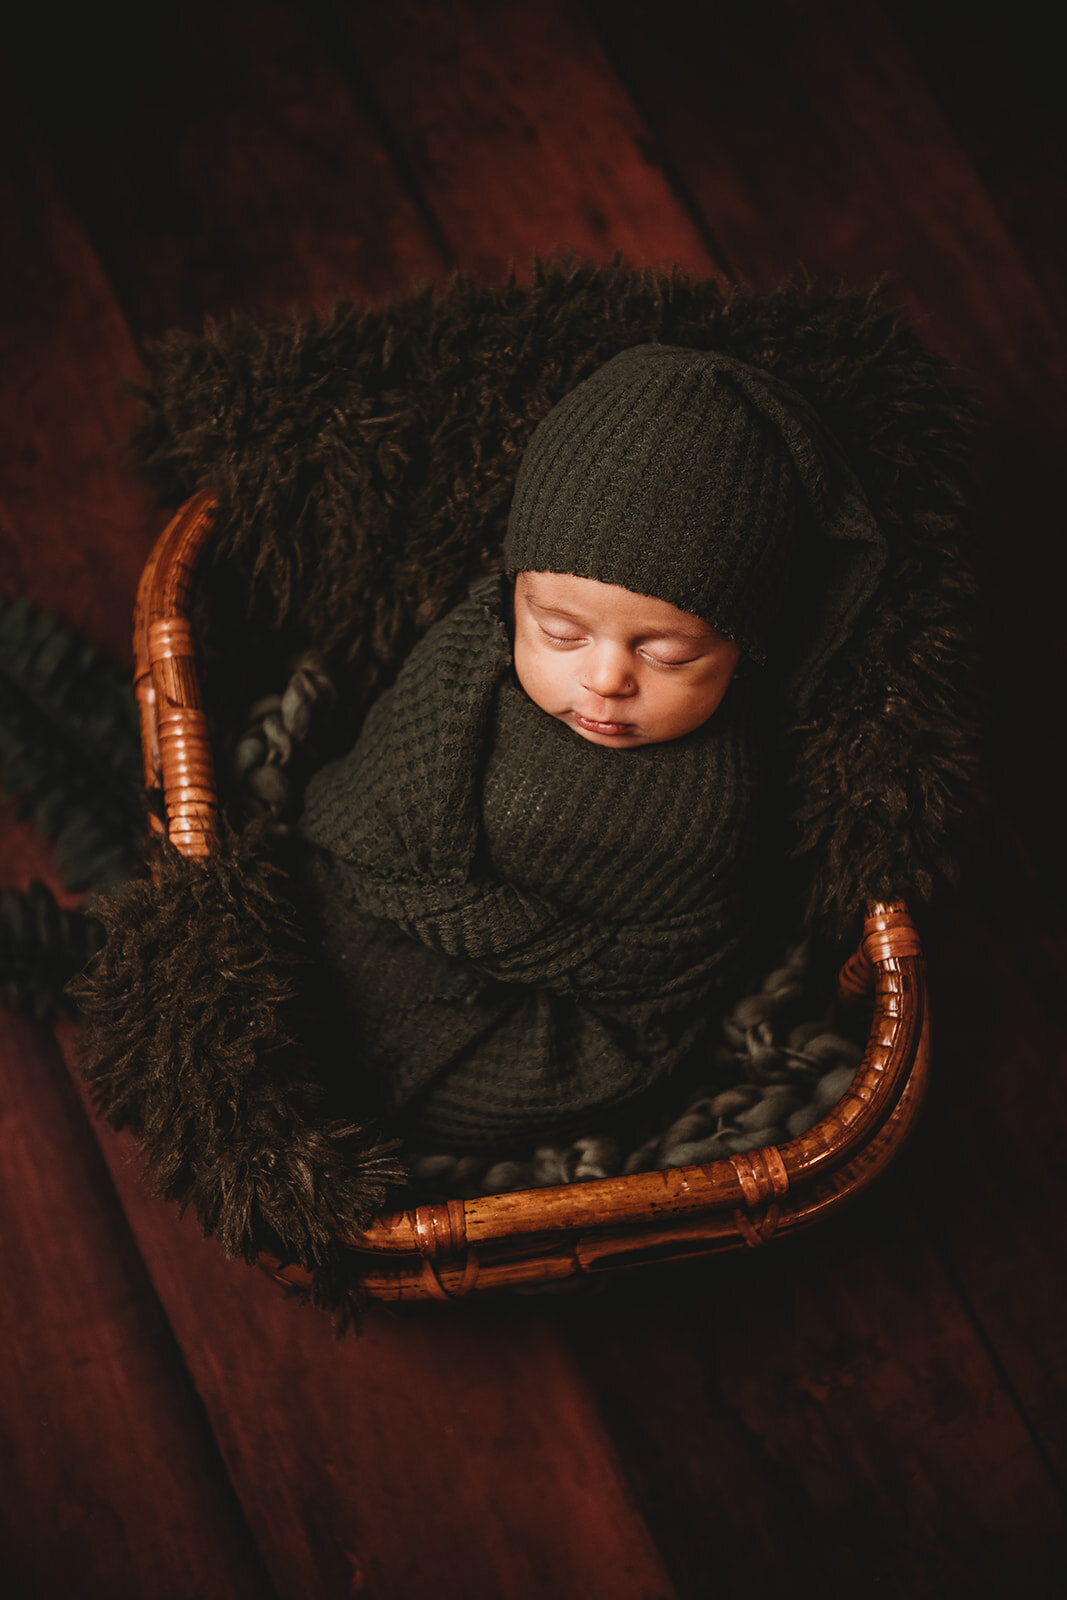 Family photographers Maryland captures newborn photography with baby in a dark grey swaddle sleeping in a cherry red basket